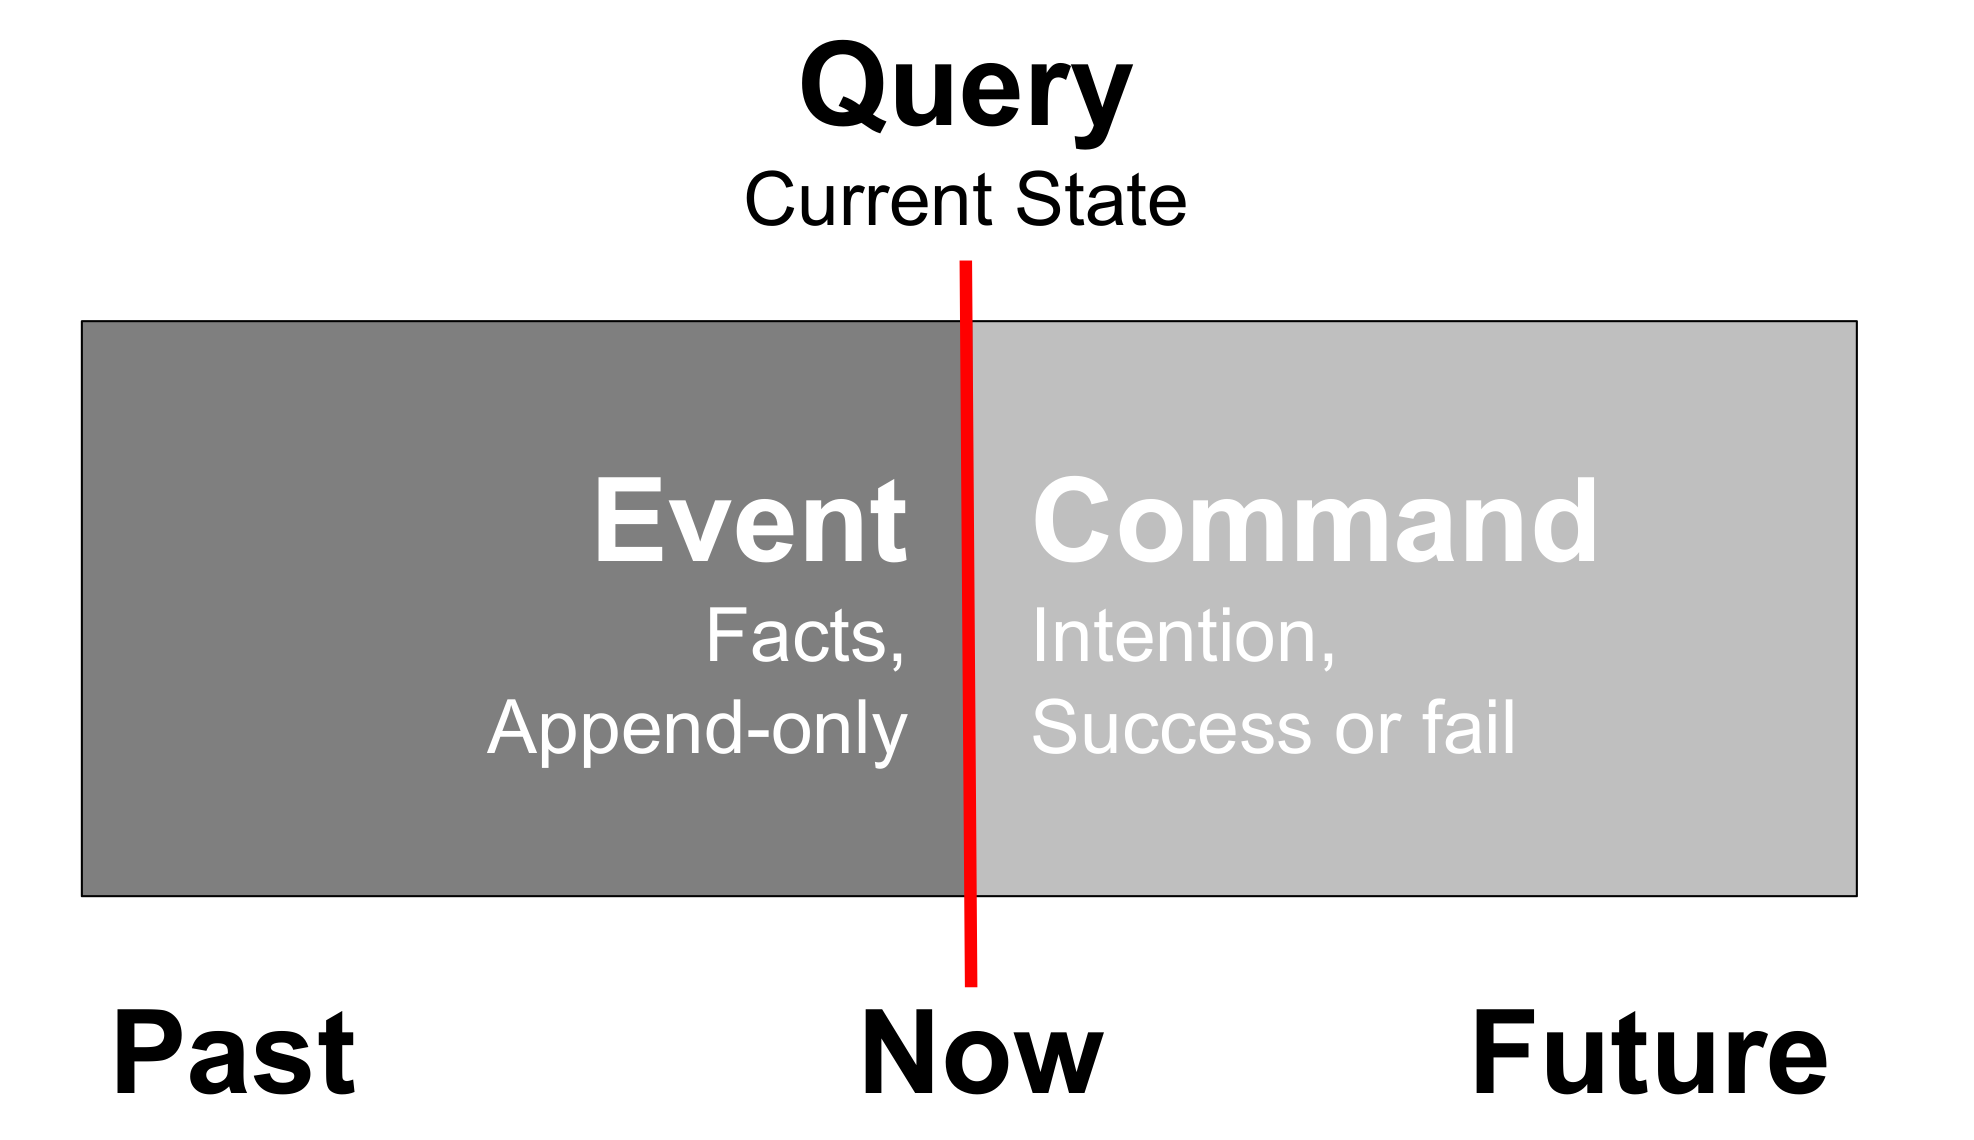 fig-image-command-query-event